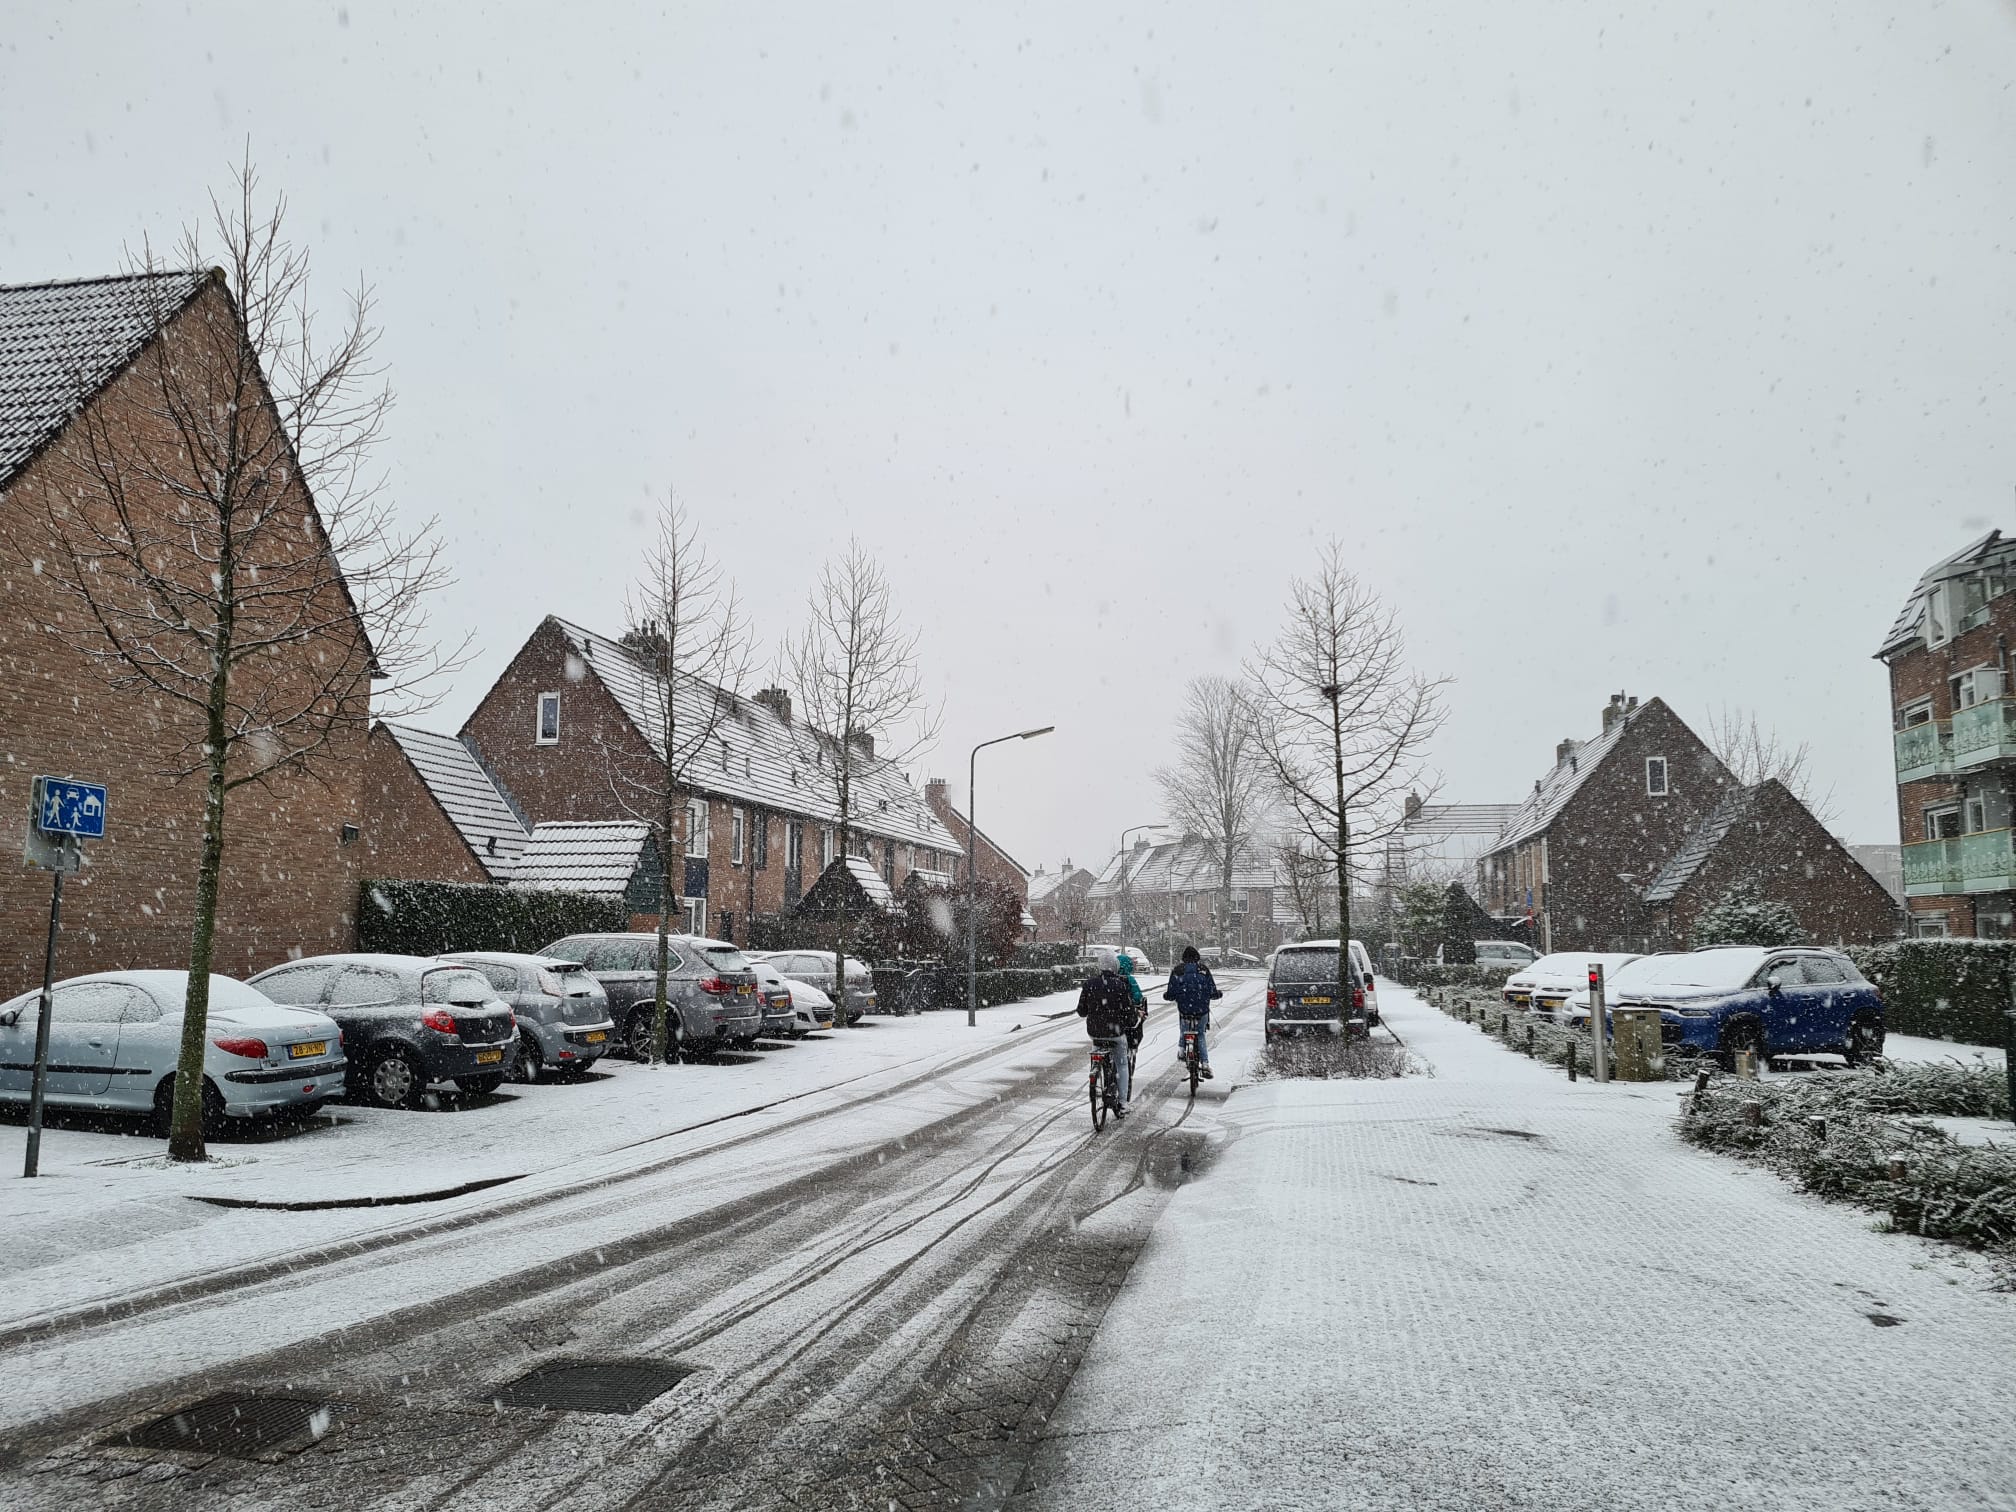 Snow showers are approaching for the Netherlands!  Will the snow stay?